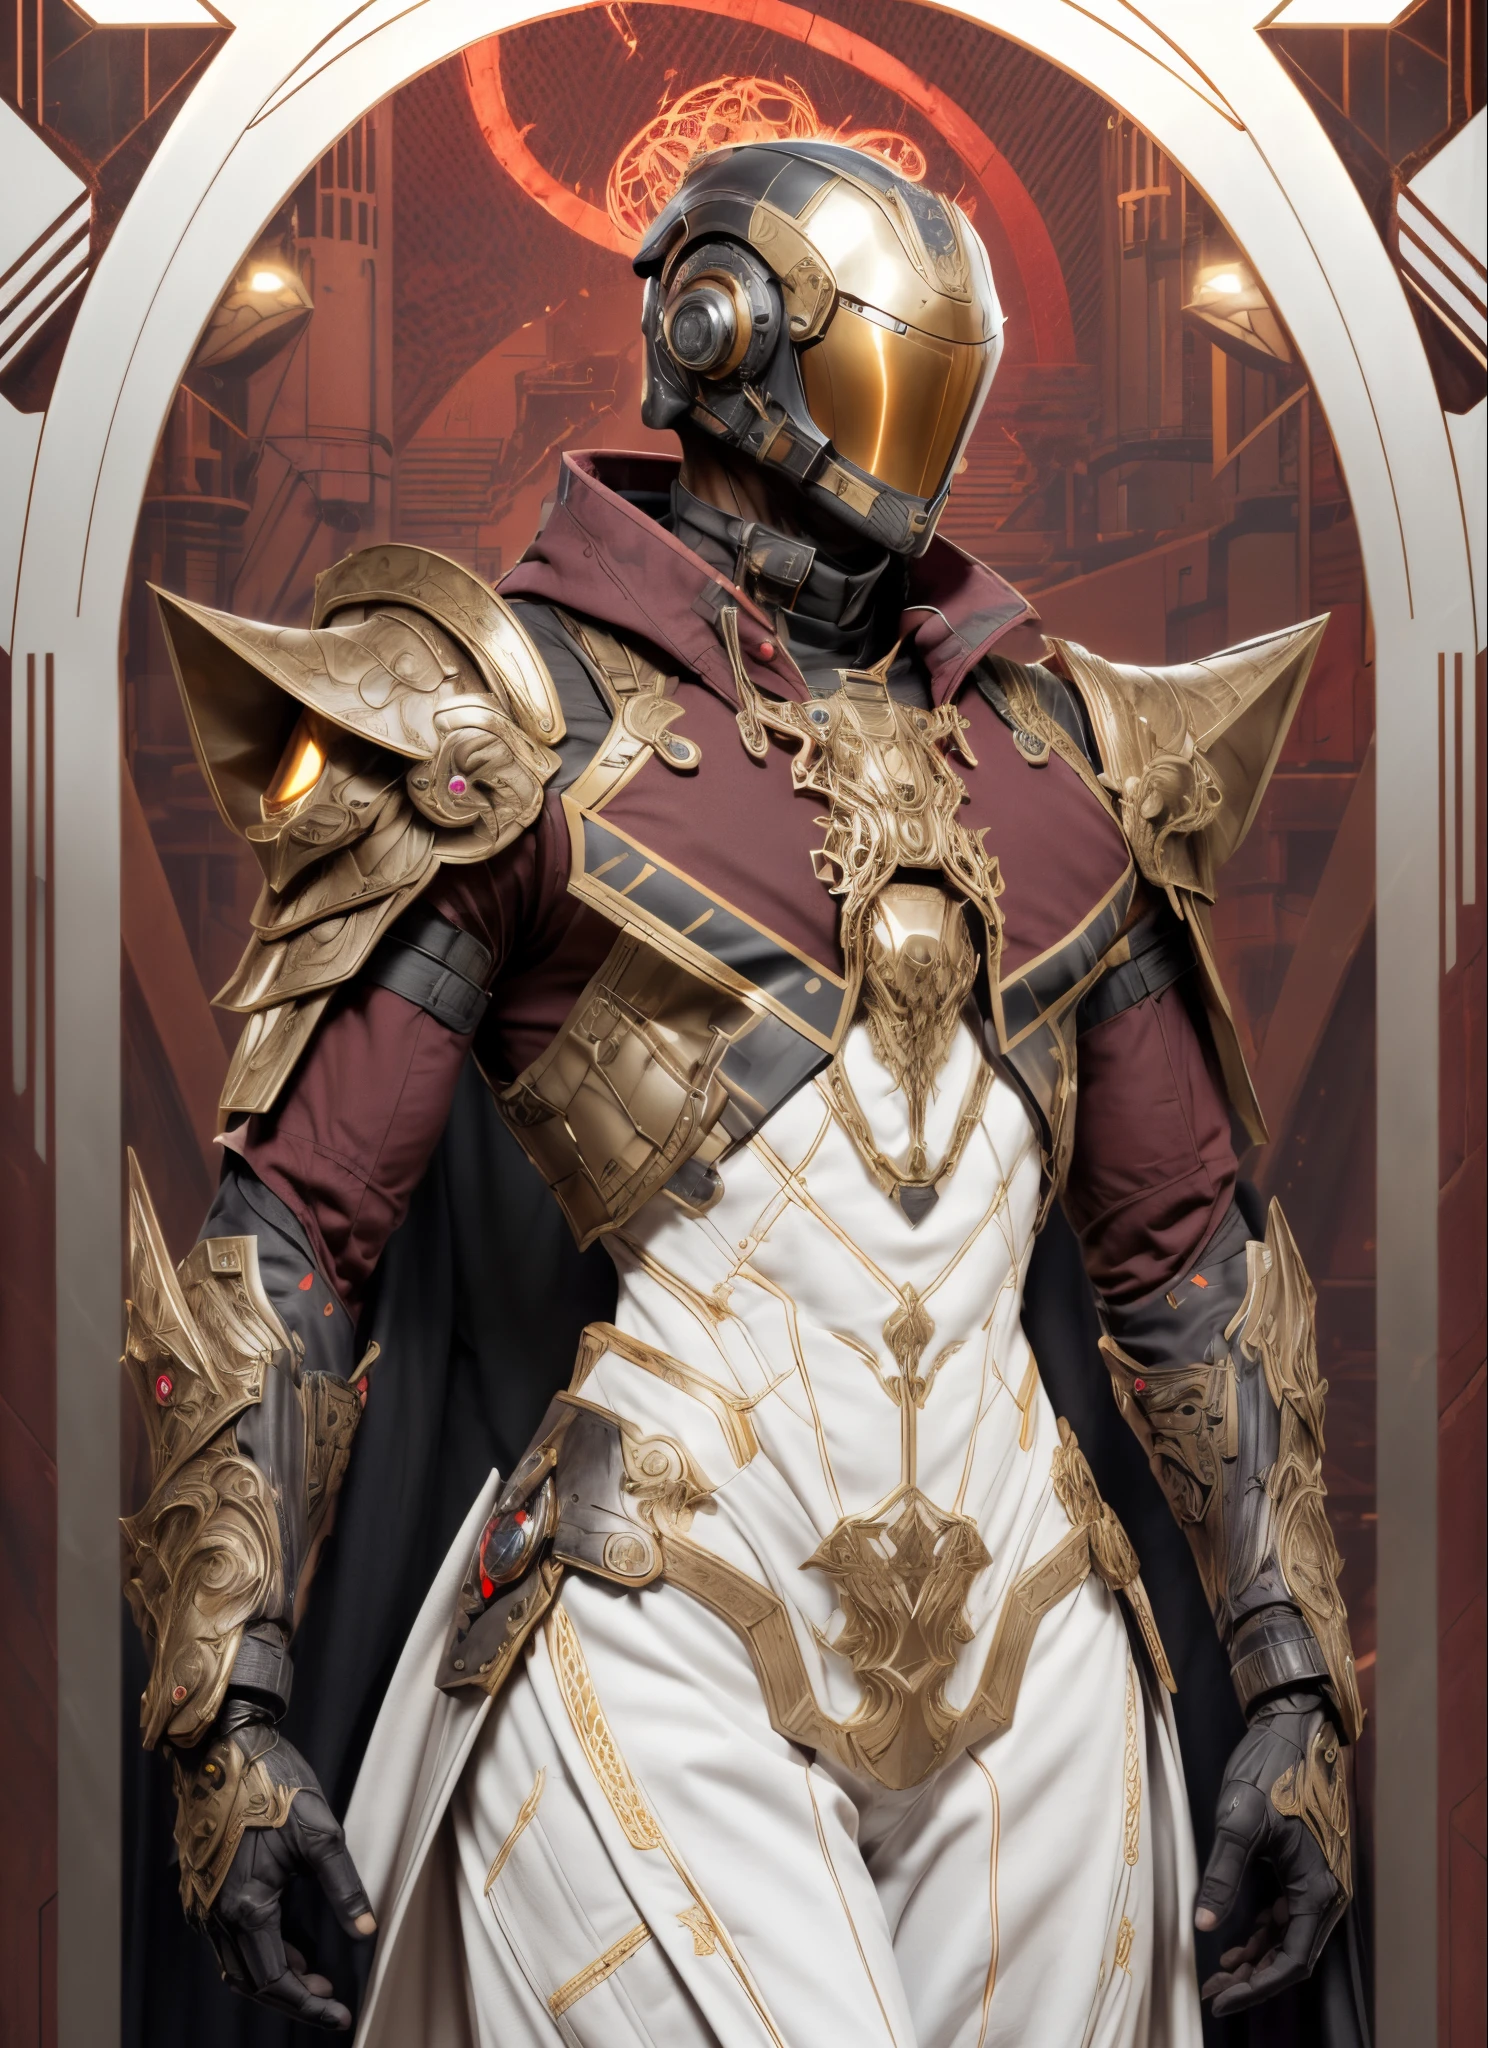 An epic and visually stunning digital artwork featuring a mid-30's feminine male astro marine with a scifi astro knight helmet that covers his whole head, armor plated flat masculine chest. The character is adorned in a scifi tactical armored trench coat, the armor plating on the upper arms and shoulders beautifully engraved. The image showcases the beauty and elegance of the character, capturing their flamboyant essence and heavy tactical goth aesthetic. The character has bright piercing beautifully rendered brass colored eyes that stand out against their helmet visor. The character also possesses androgynous features, with slim yet heavily muscled physique, sylphlike with a beautiful feminine waist and toned yet beautifully sleek cybernetic arms, gothic tribal markings flowing up their abs and down their arms, adding to their unique appearance, extremely beautiful eyes, extremely detailed eyes